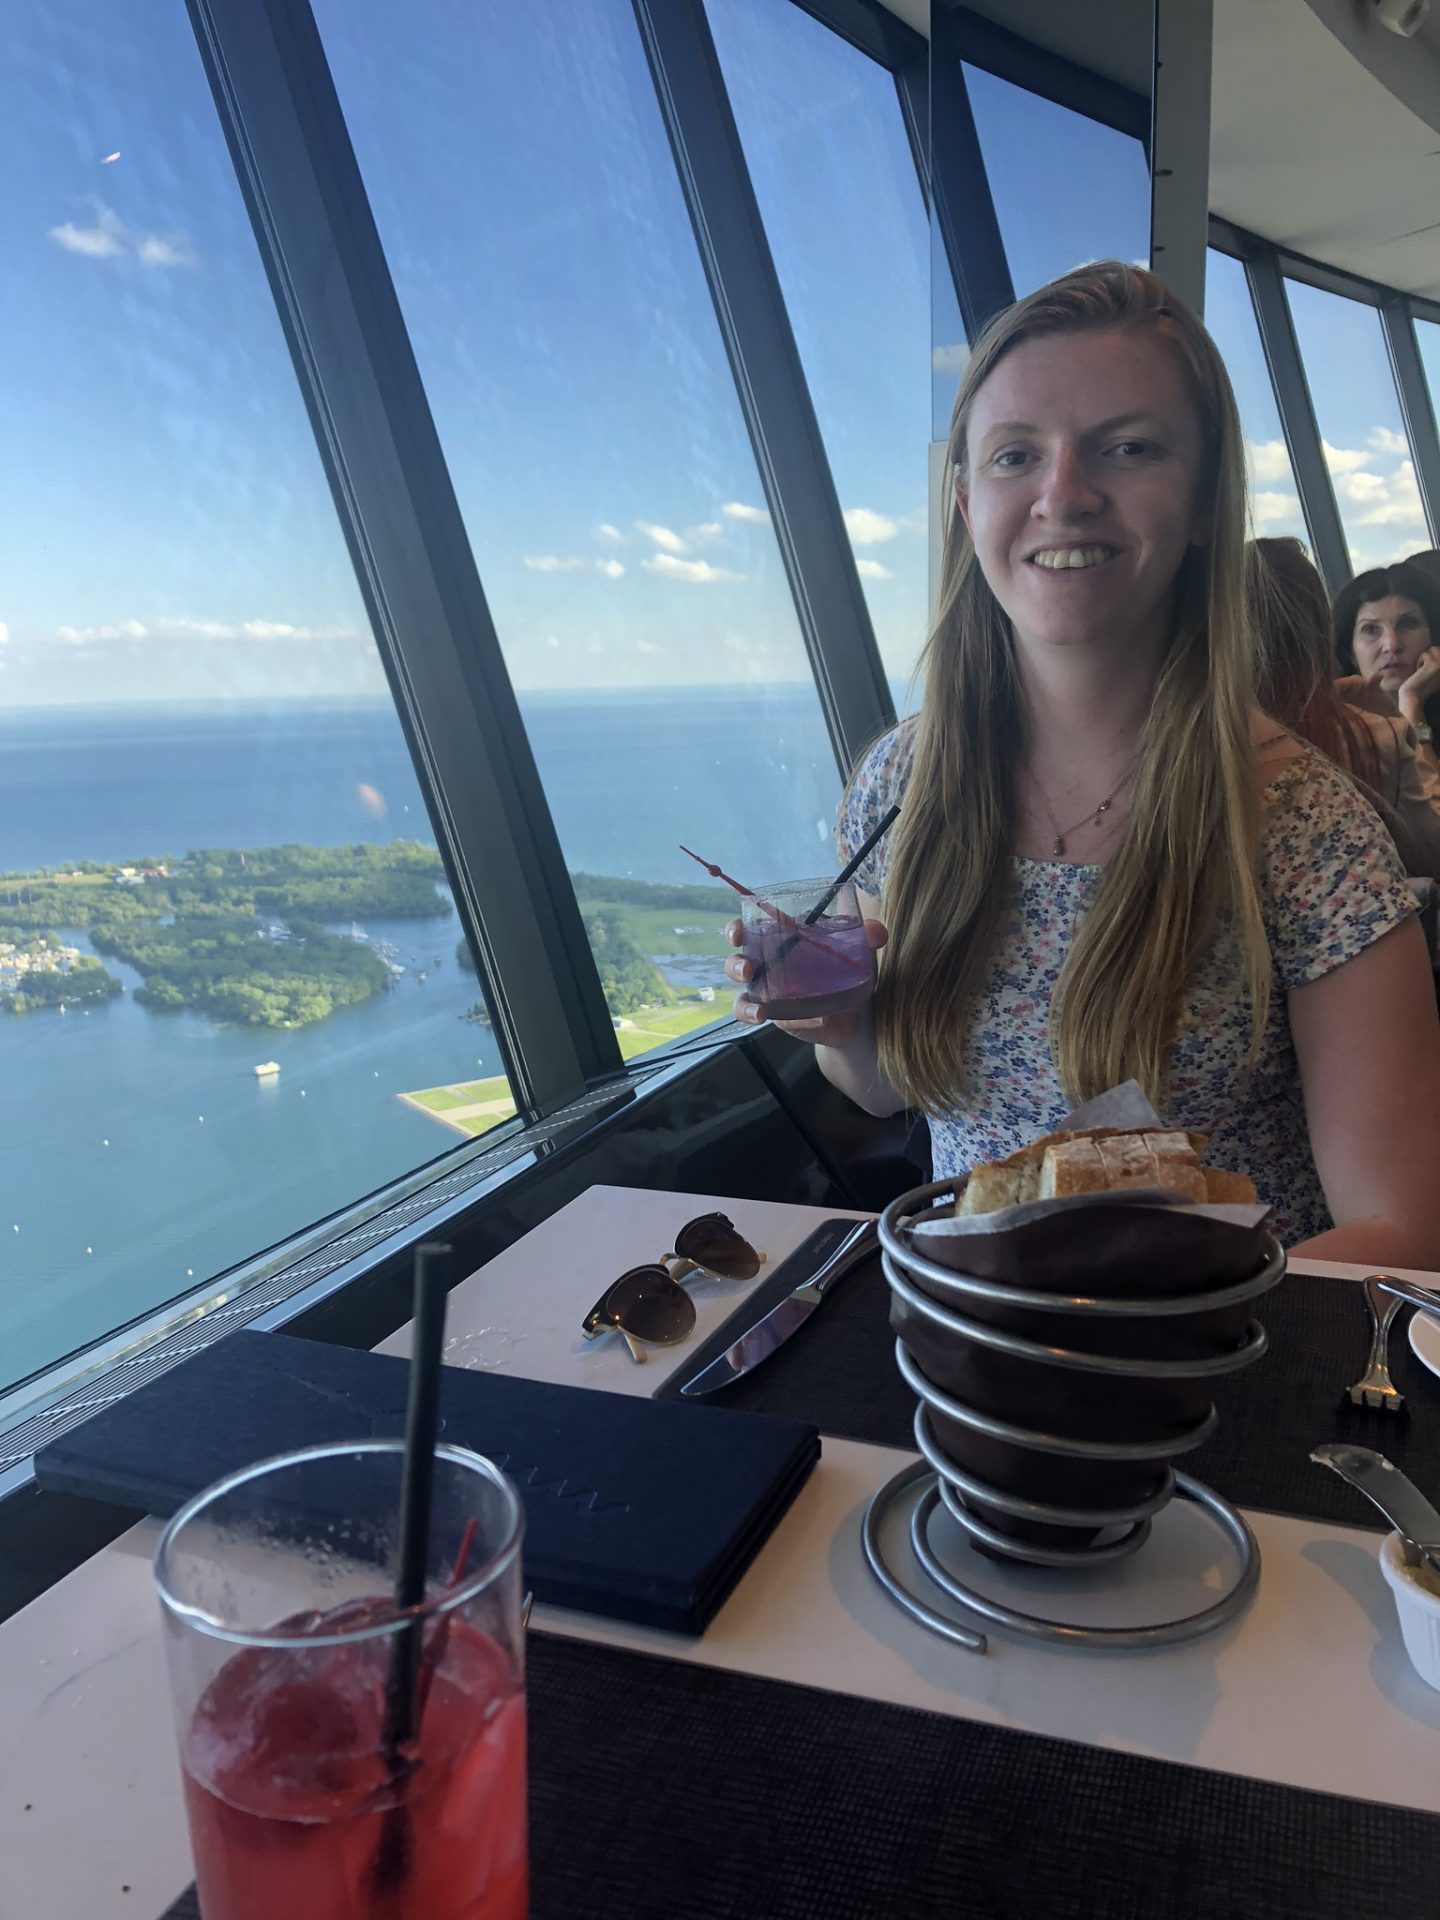 Dinner in the CN Tower